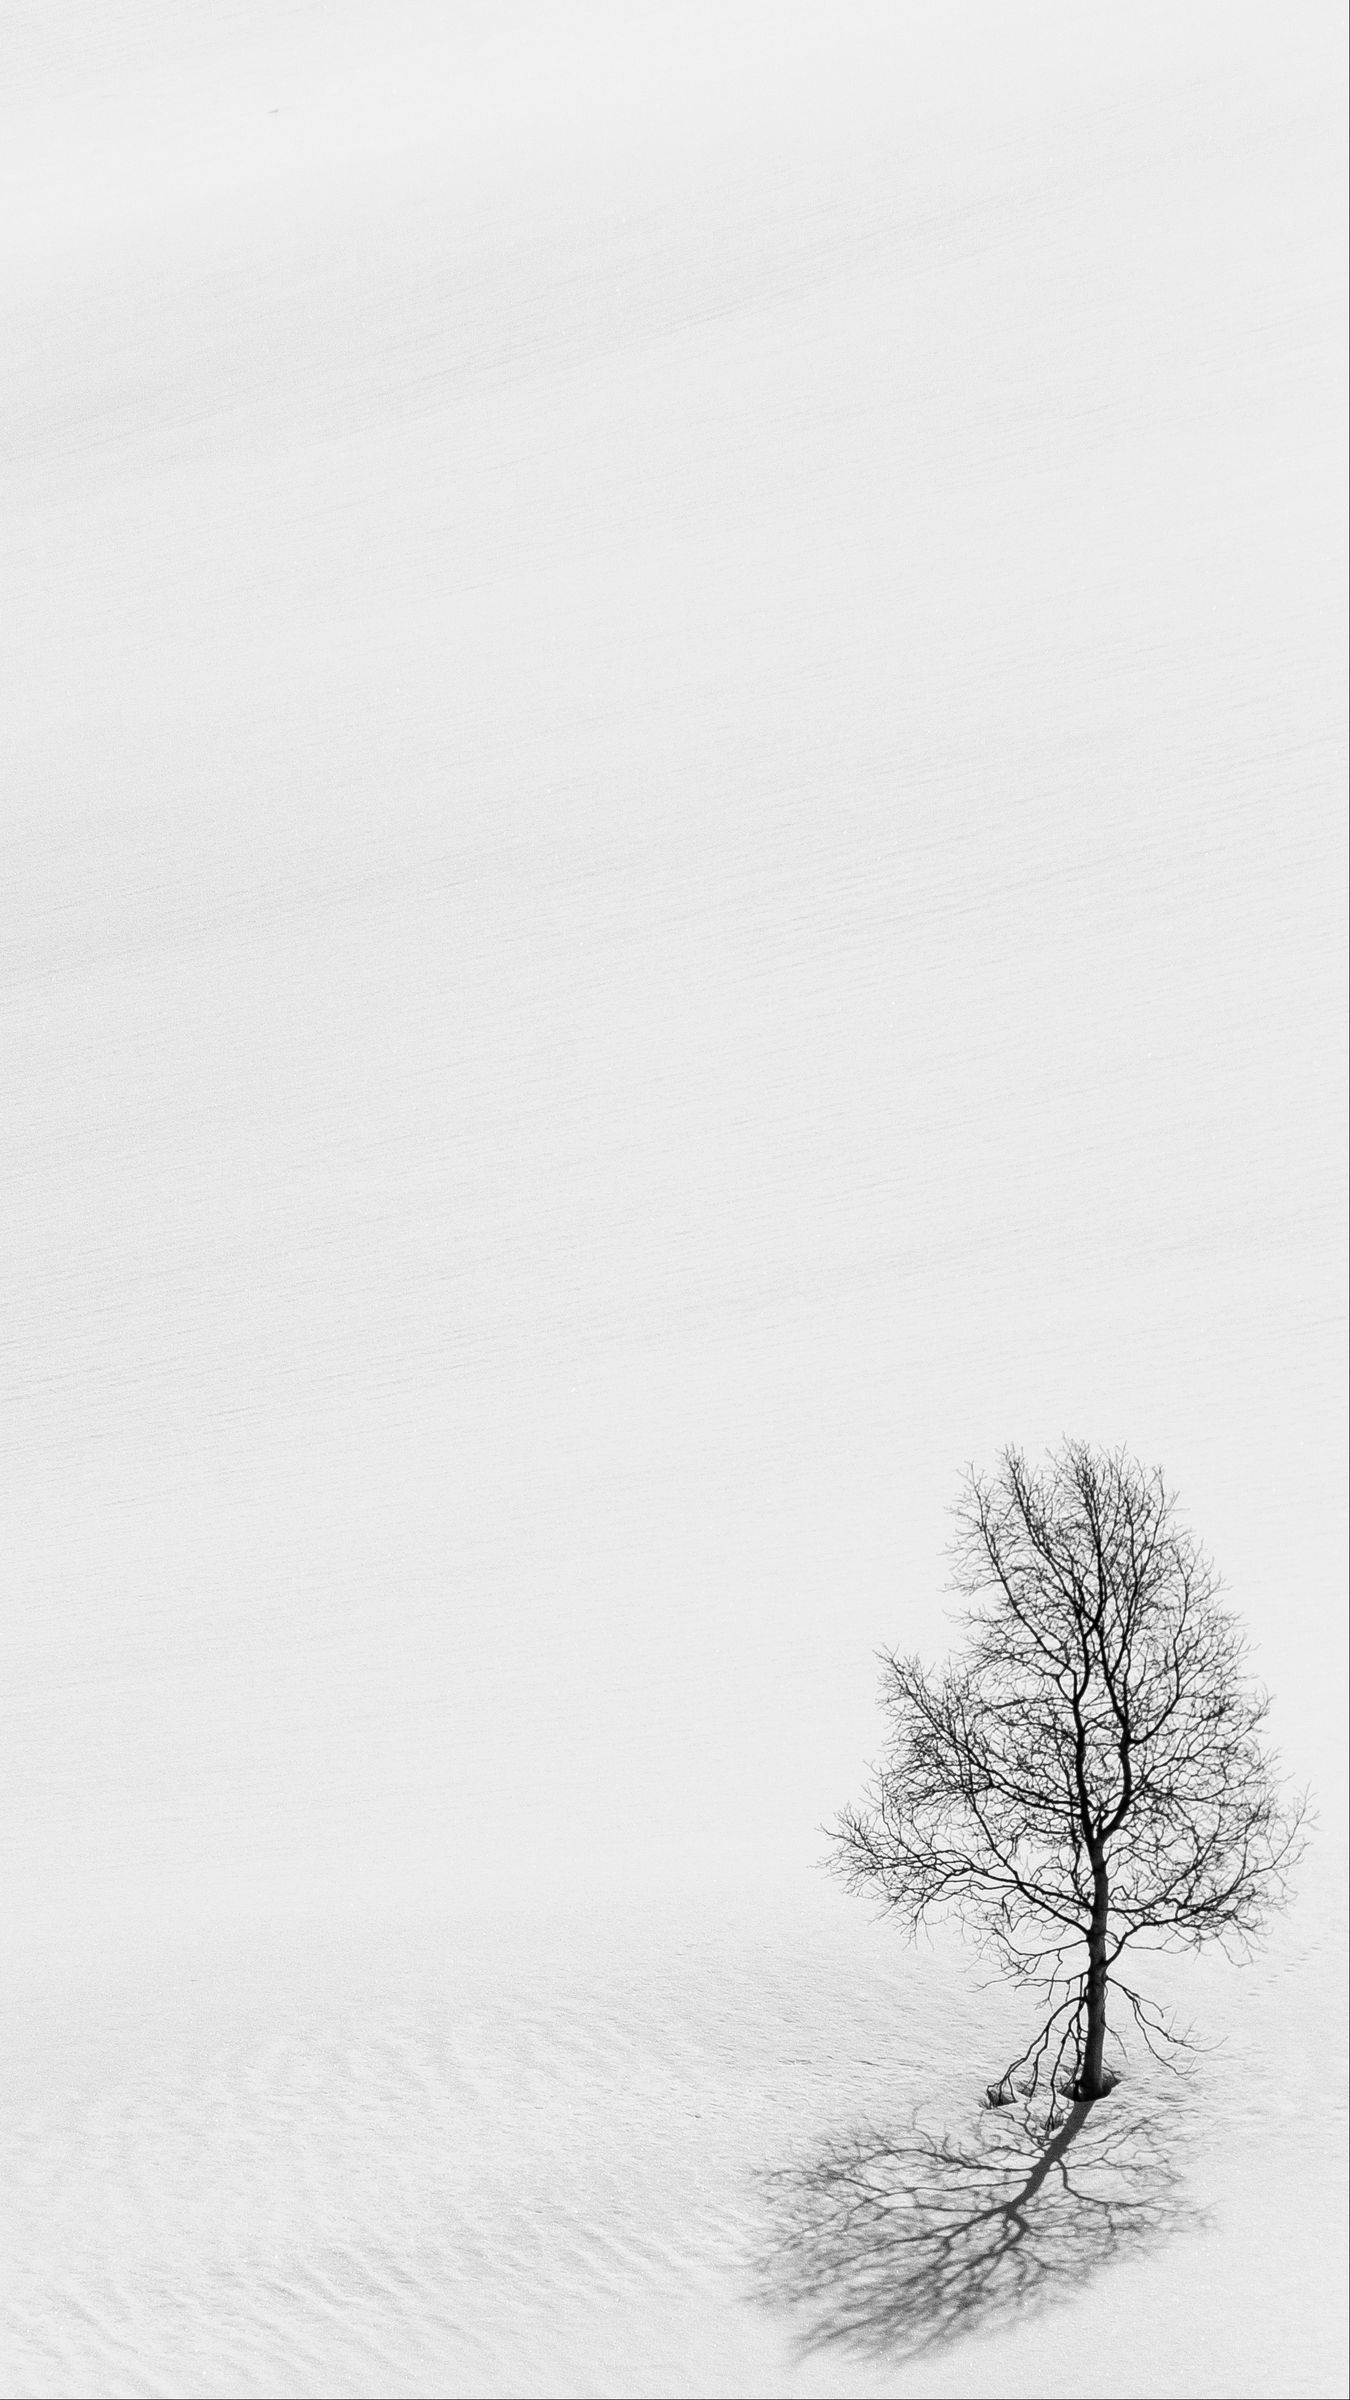 Download wallpaper 1350x2400 tree, snow, minimalism, bw, winter iphone 8+/7+/6s+/for parallax HD background